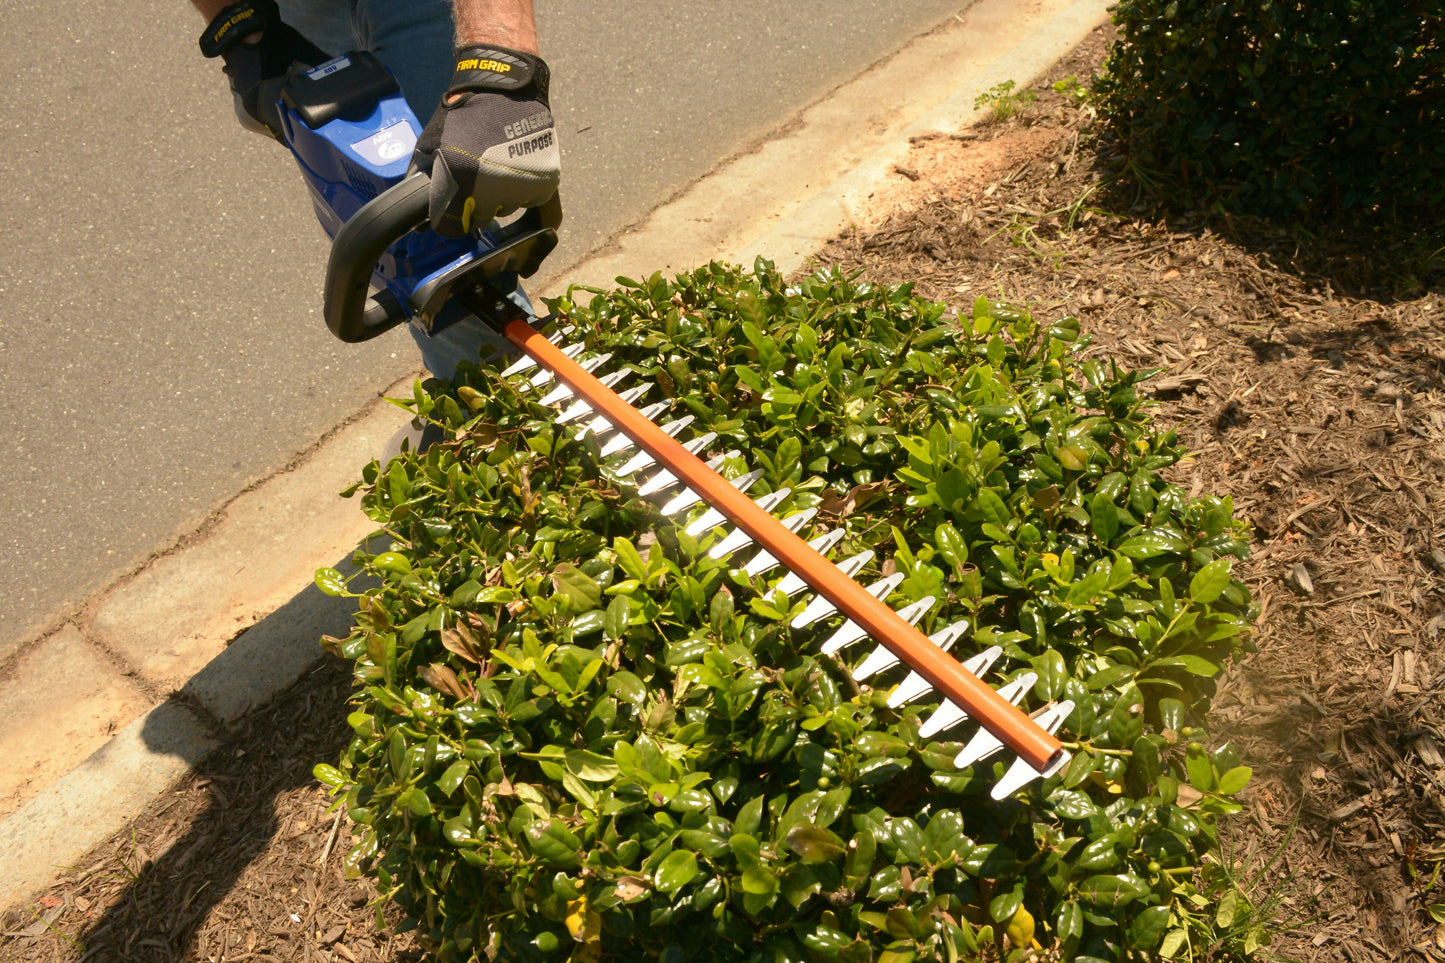 Wild Badger Power Cordless 40 Volt 24-inch Brushed Hedge Trimmer, Includes 2.0 Ah Battery and Clip-on Charger